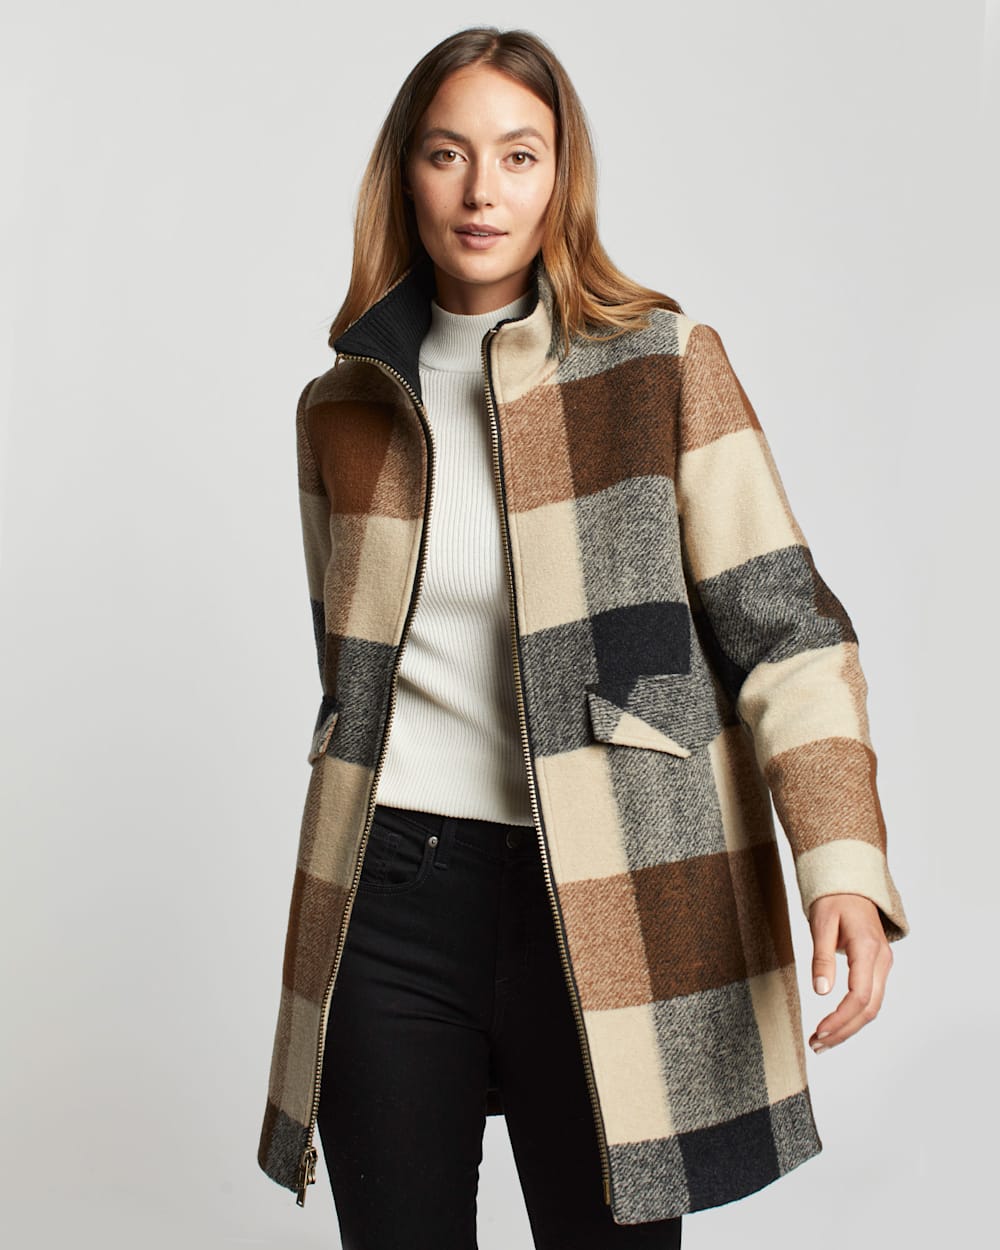 WOMEN'S CAMDEN TOPPER COAT IN CAMEL/CHARCOAL PLAID image number 1